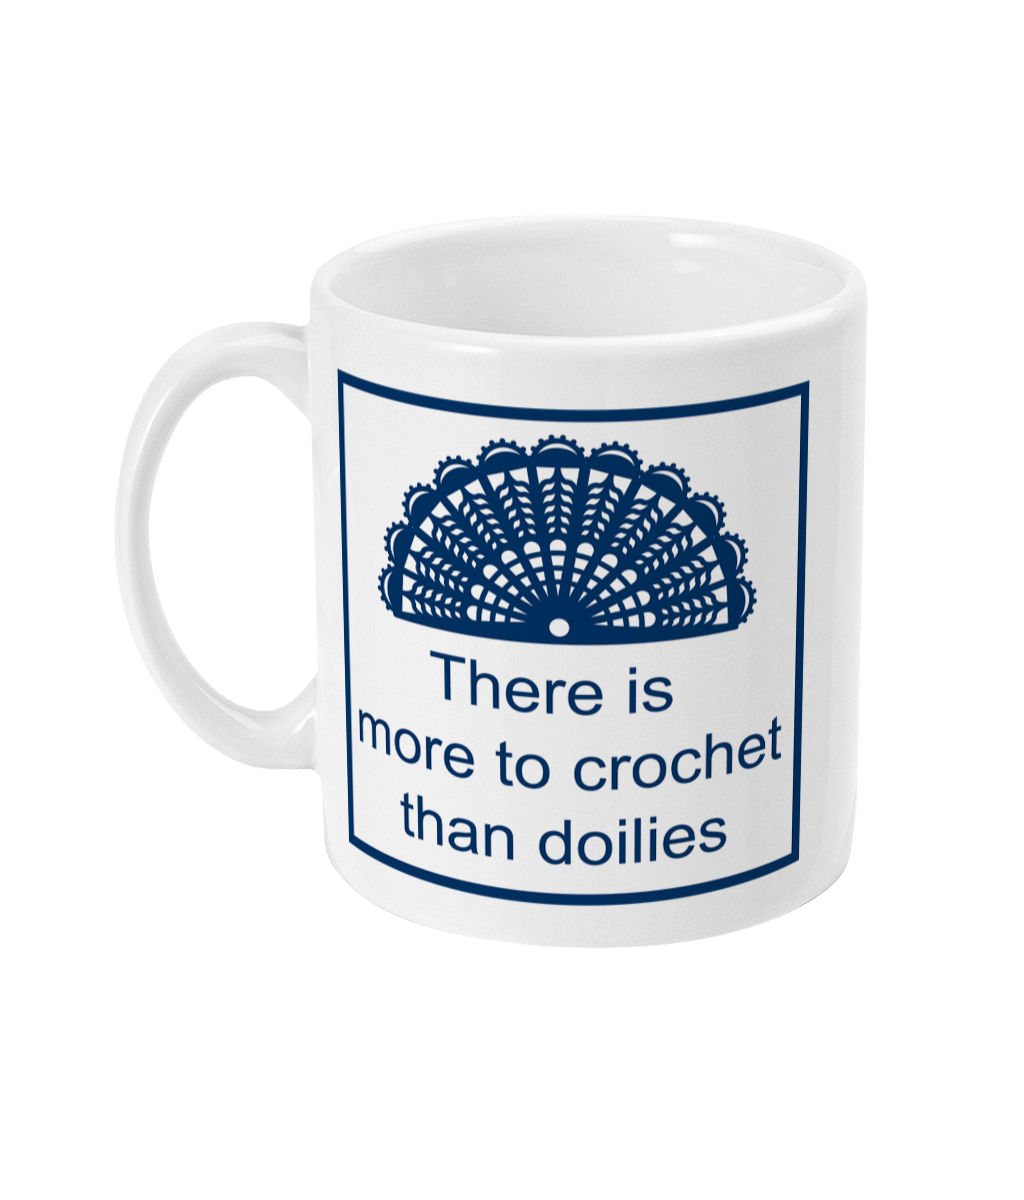 mug with an image of a crochet doily with the text there is more to crochet than doilies